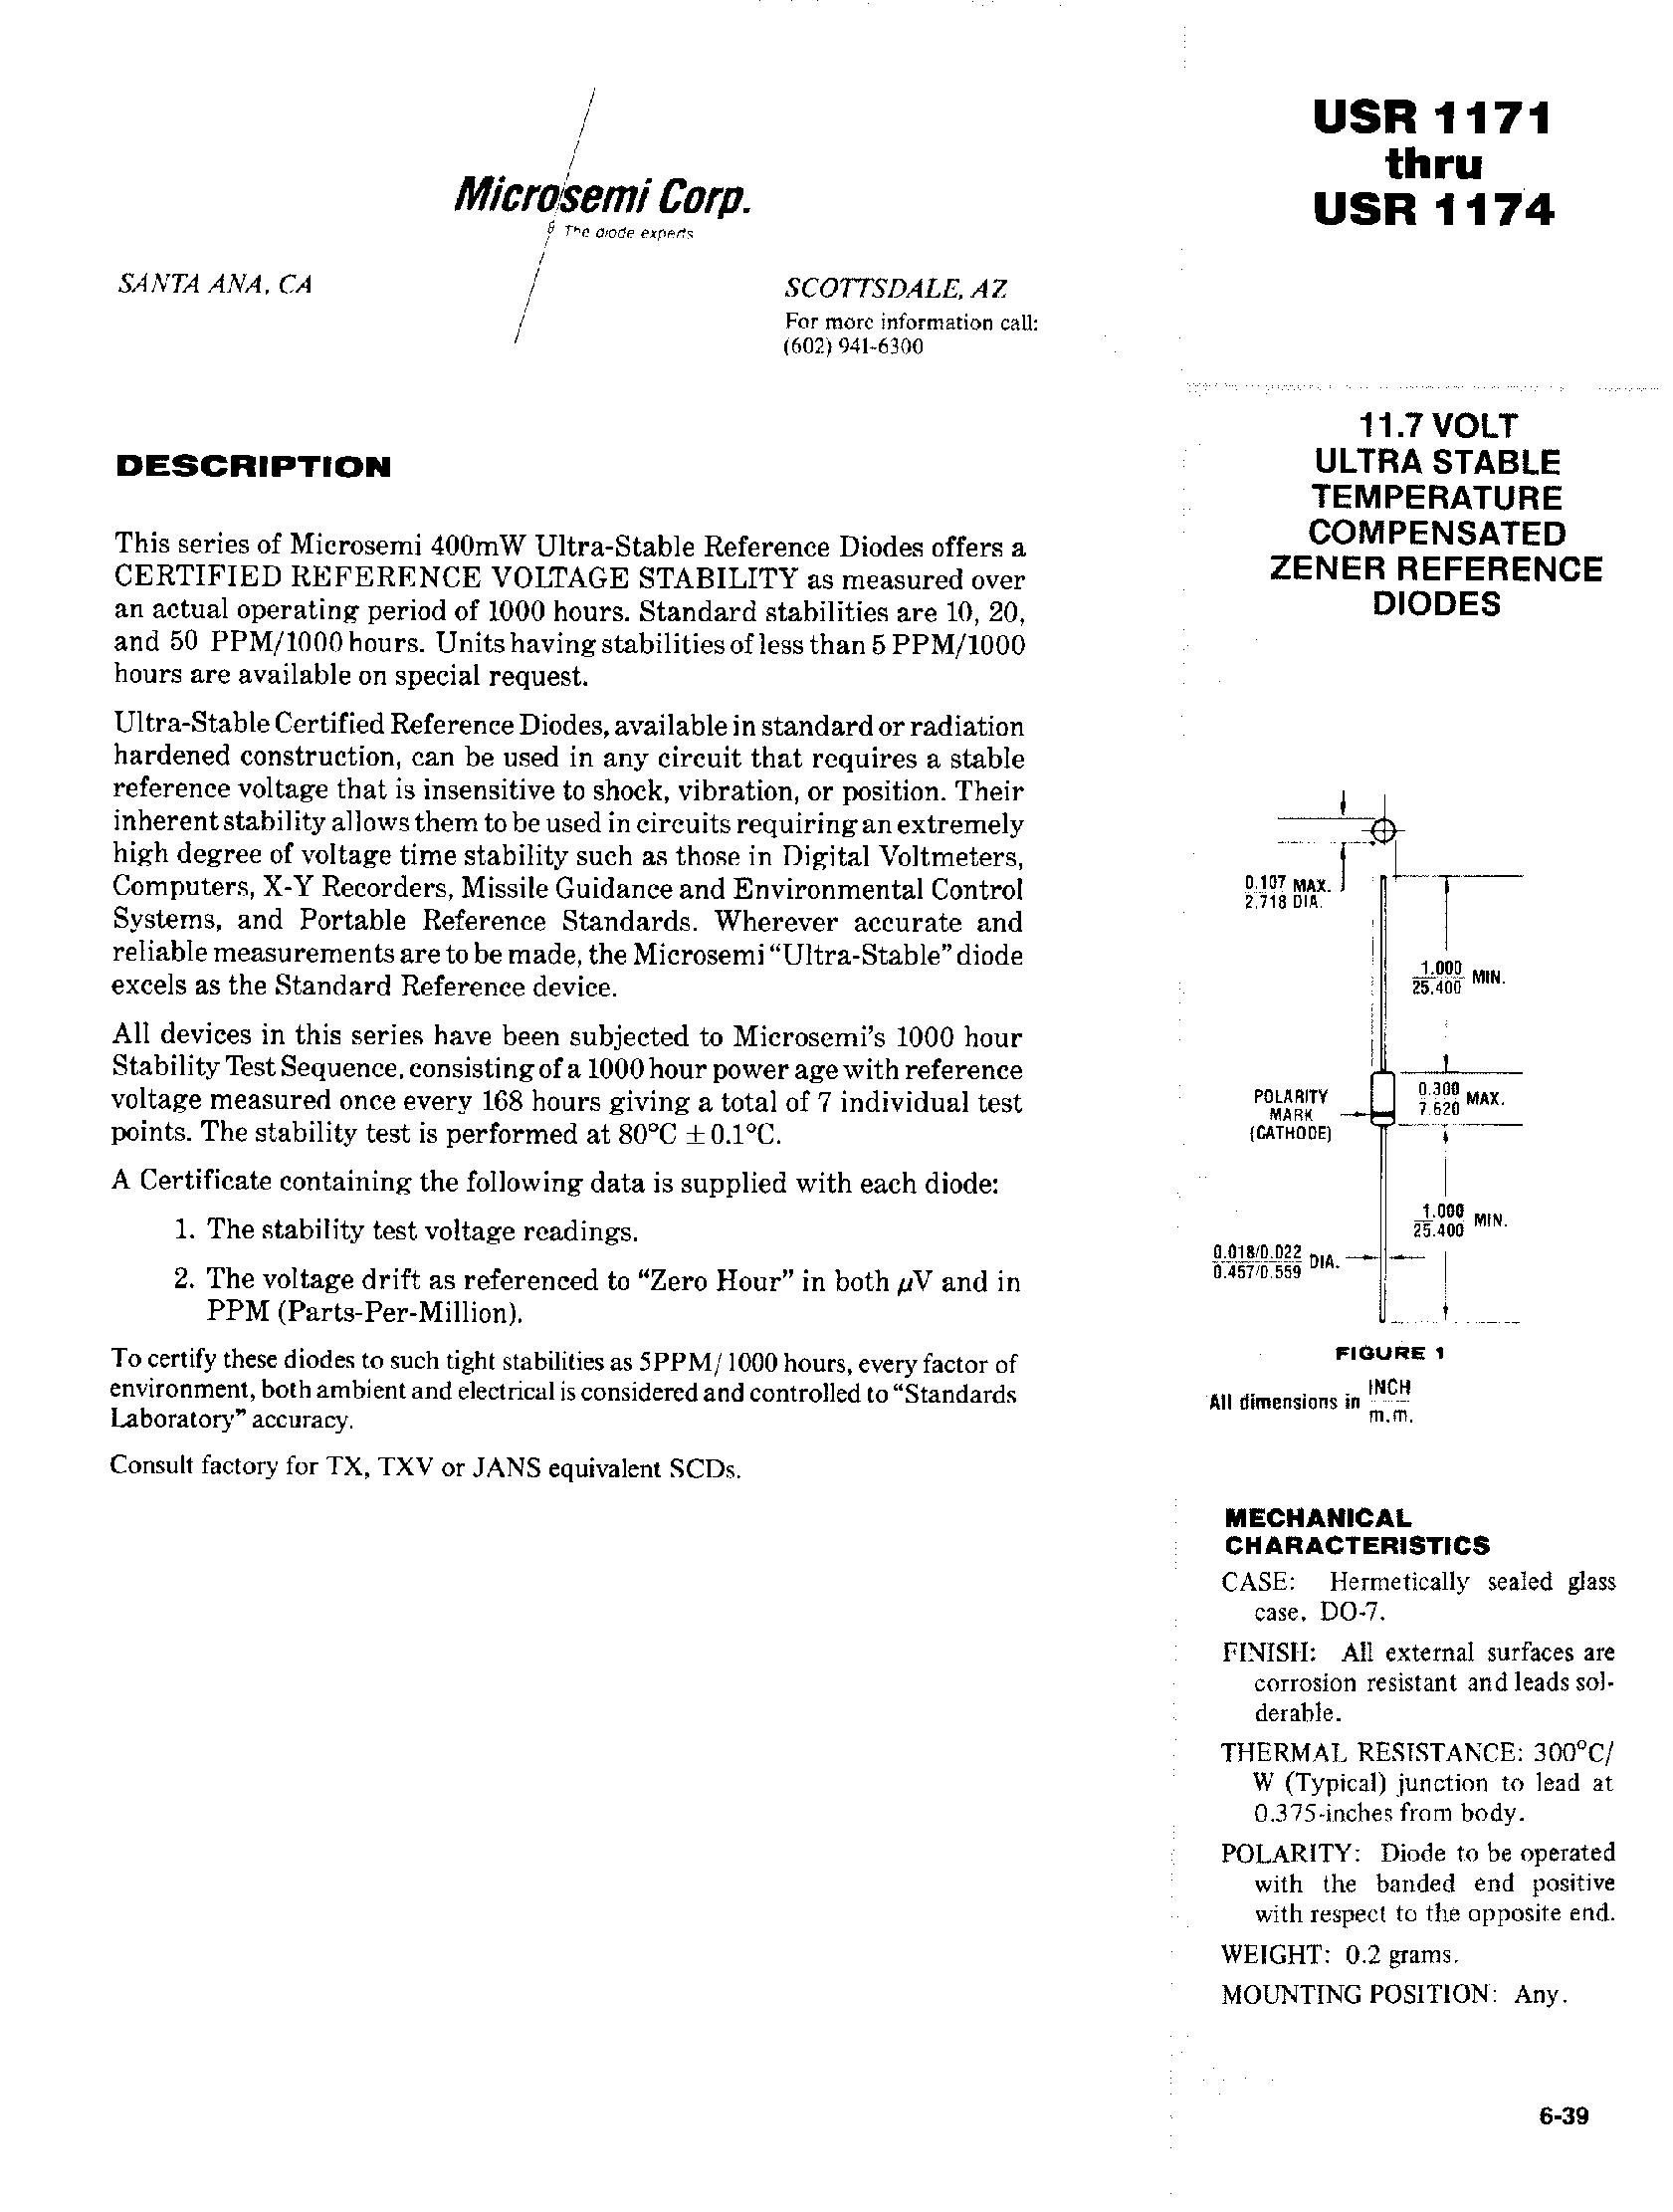 Datasheet USR1174 - 11.7 VOLT ULTRA STABLE TEMPERATURE COMPENSATED ZENER REFERENCE DIODES page 1